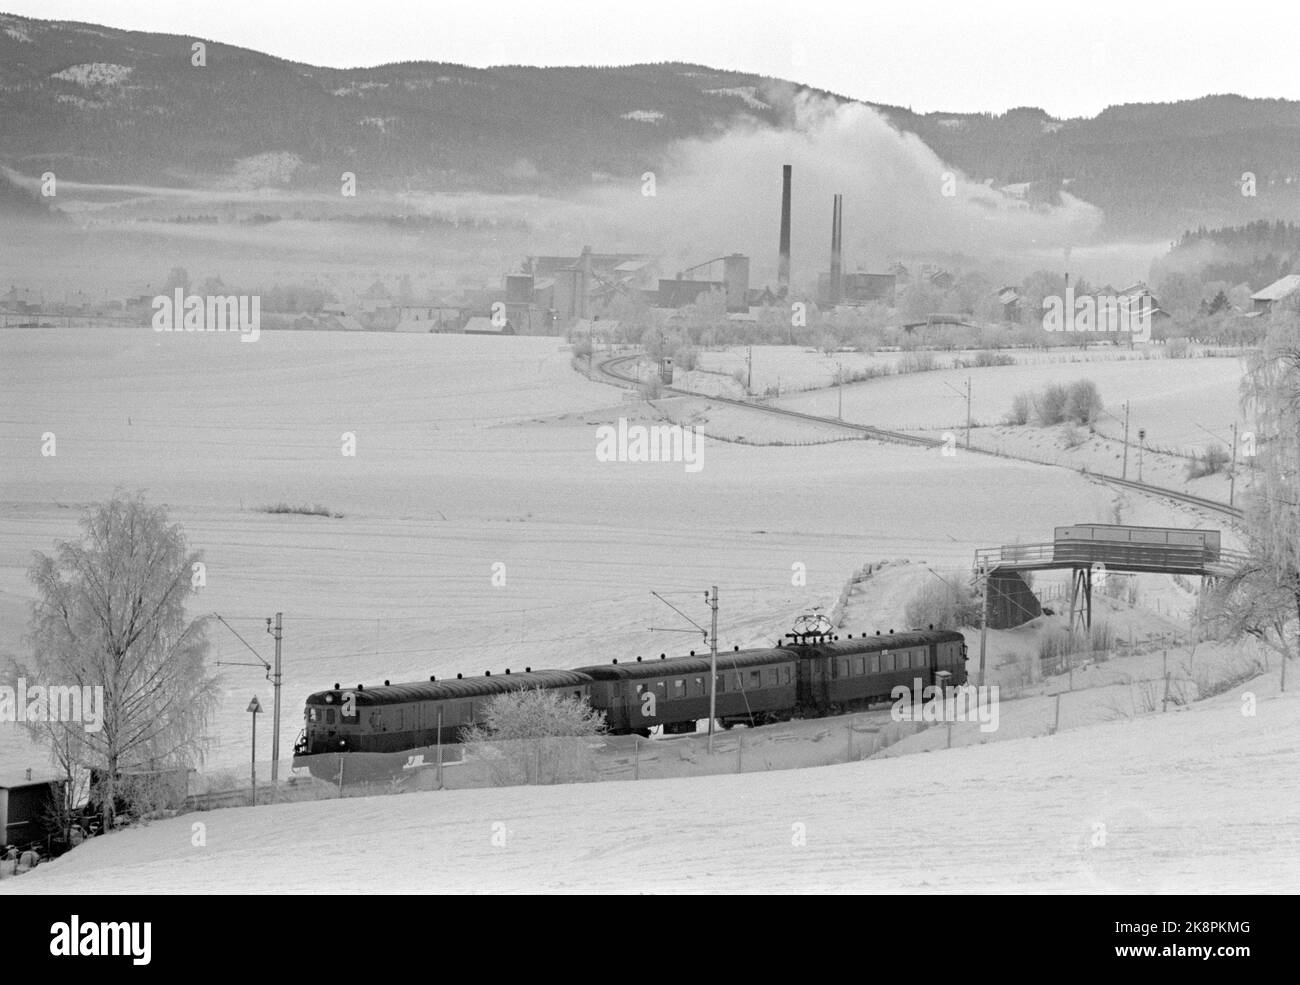 Vestfossen 19701212 The wheels are on the Vestfossen dismissals at Vestfos Cellulose came as a shock to the employees, as did the bankruptcy. Poor treatment of the employees. Environmental images from the last working days before the company closed its doors. Trains drive through the landscape. Photo; Sverre A. Børretzen / Current / NTB Stock Photo